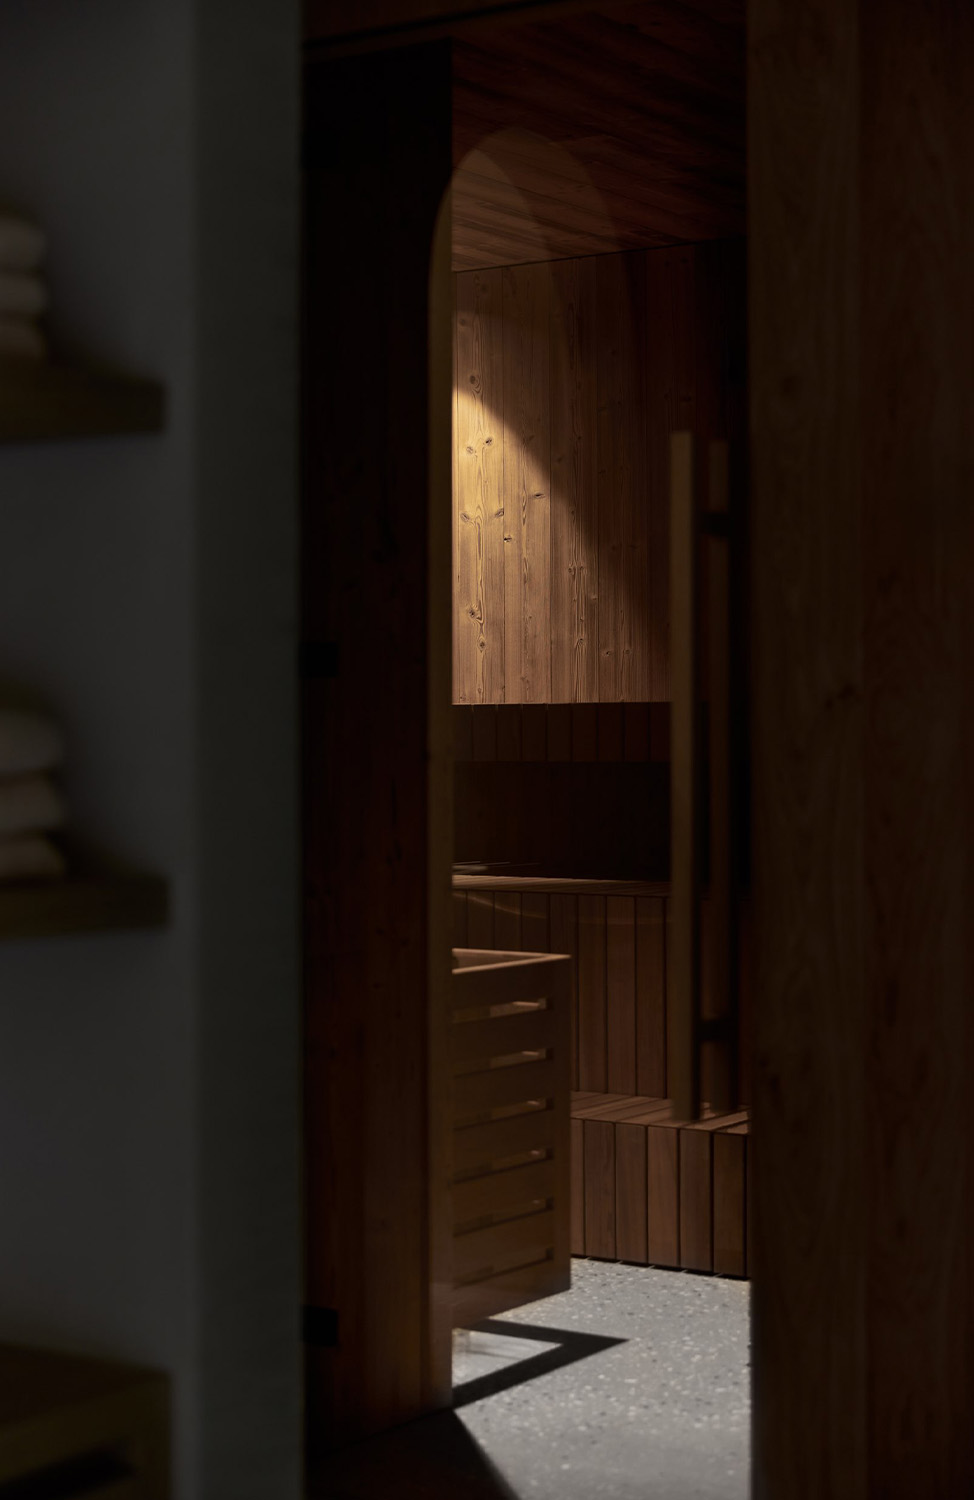 Wooden sauna photographed in a warm atmospheric atmosphere